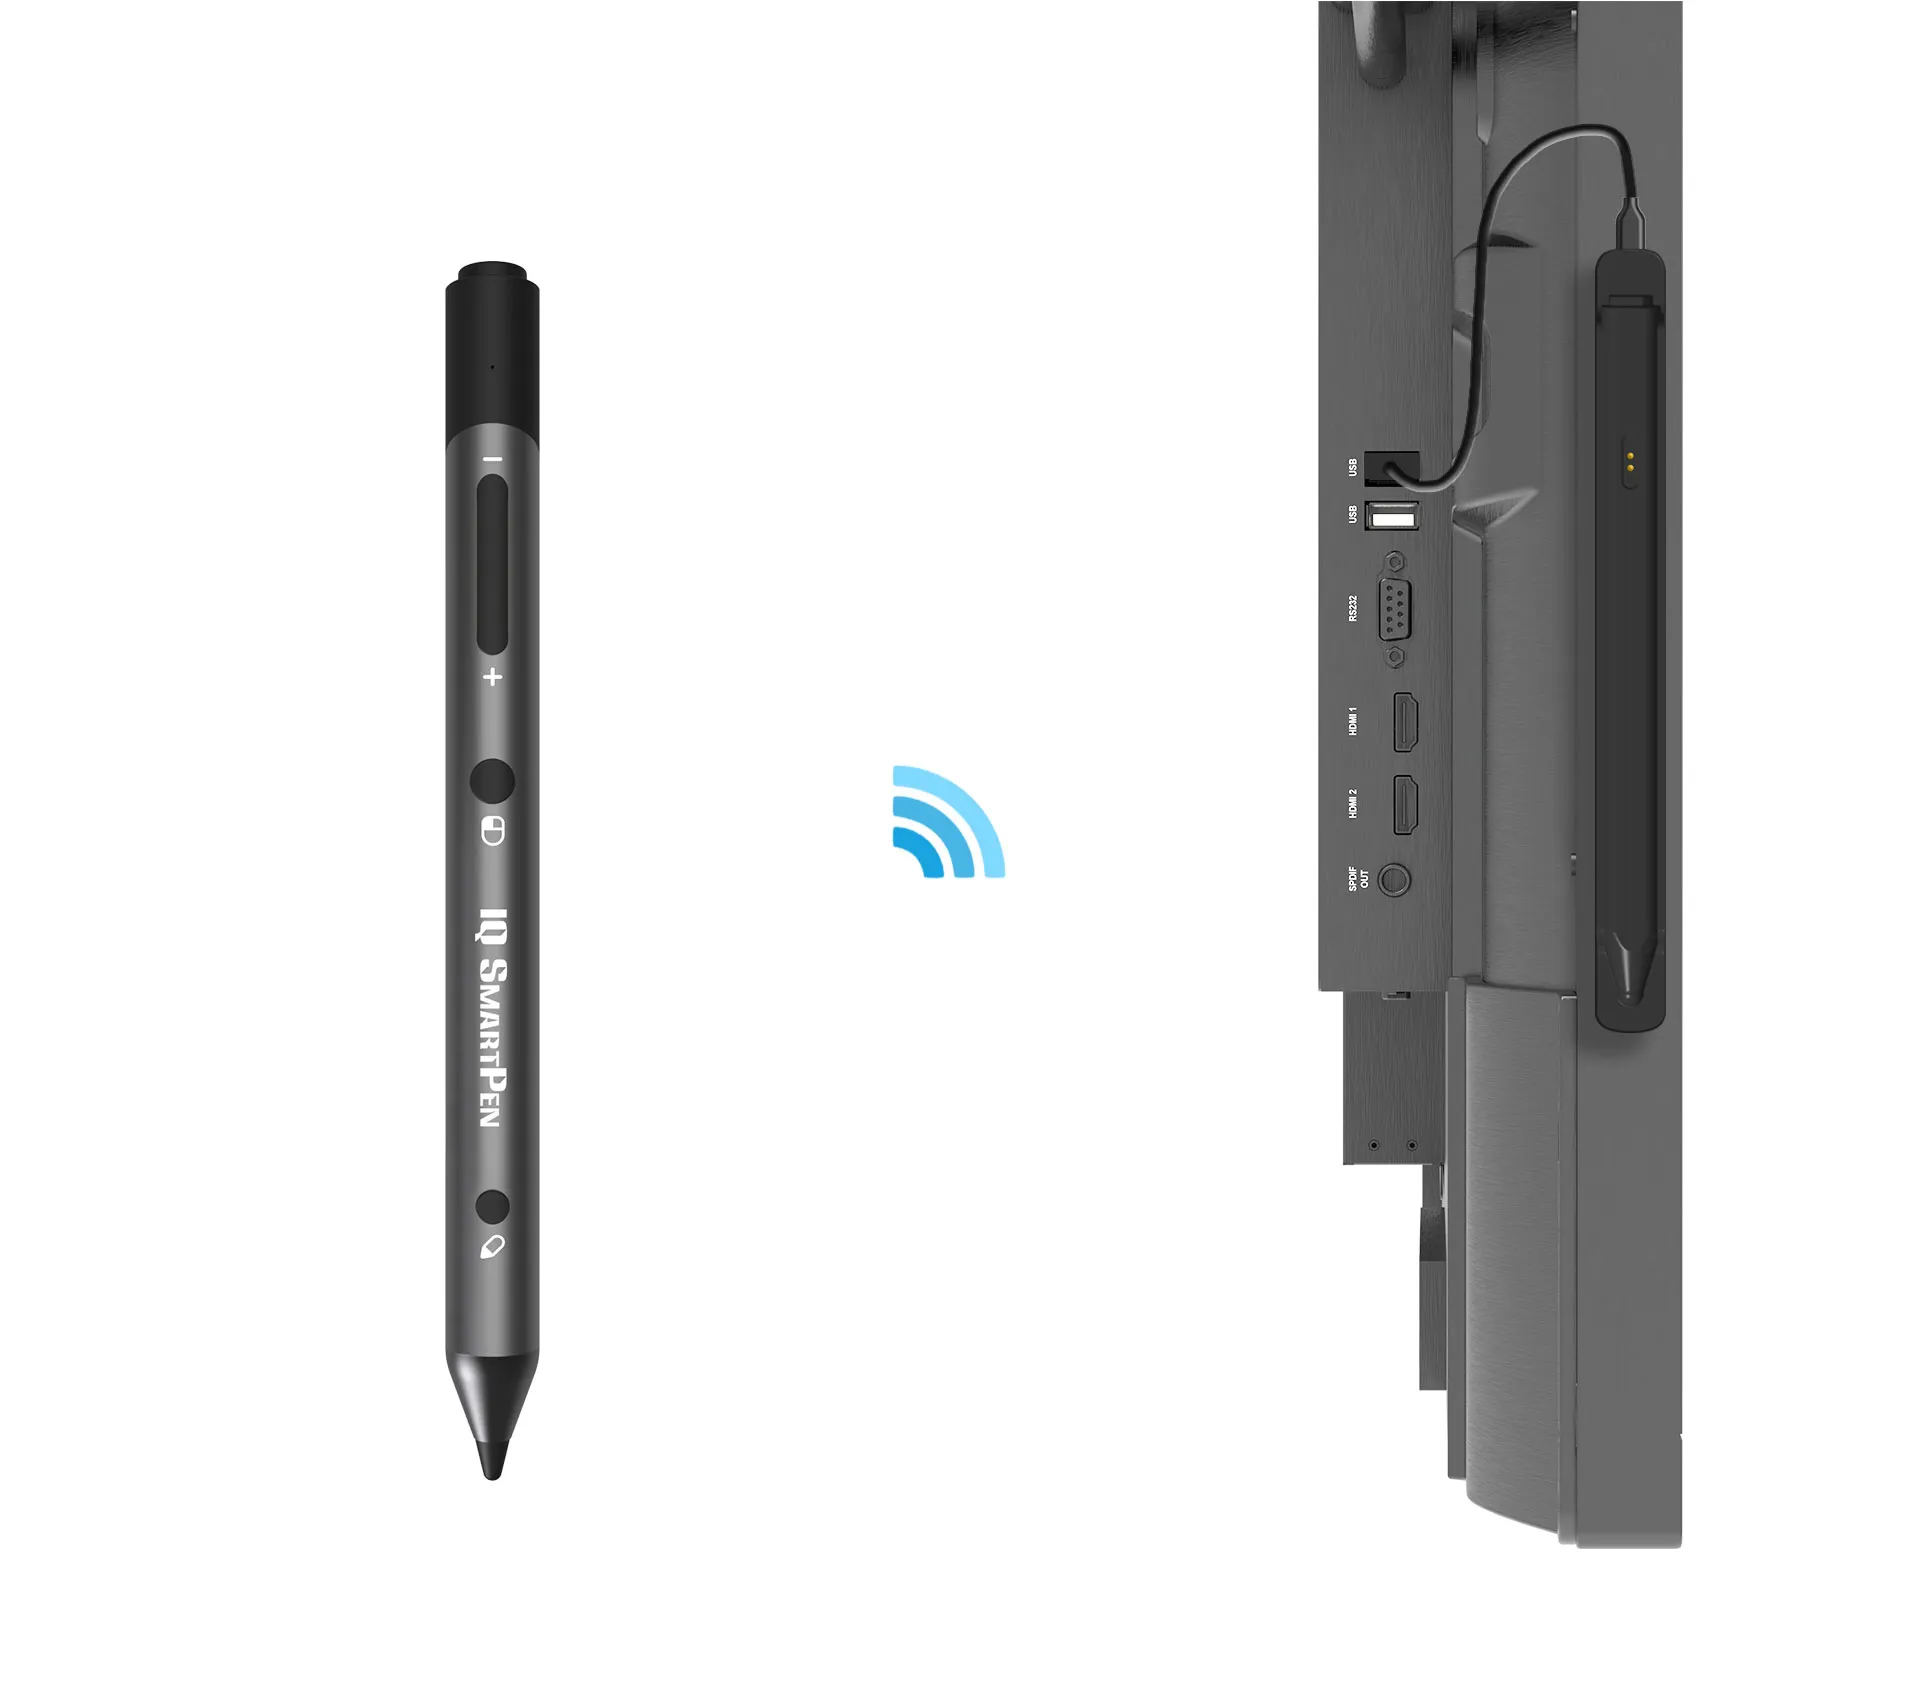 IQSmartPen has a charging base with Type-C port for connection, pair, and charging